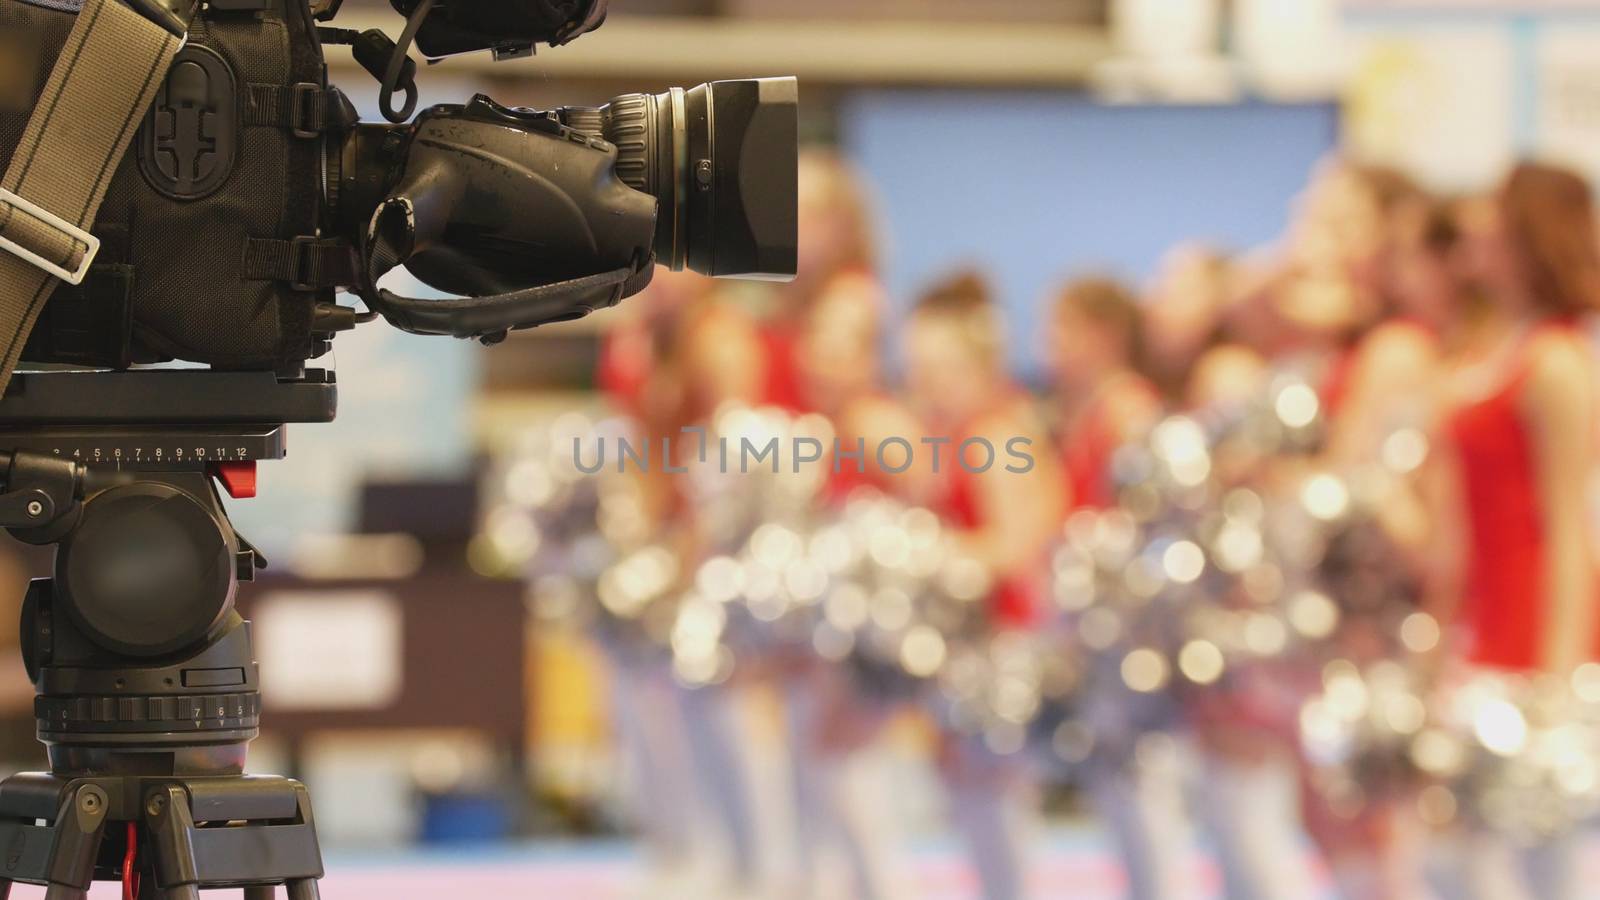 Camera in front of girls cheerleaders at sport championship, blurred